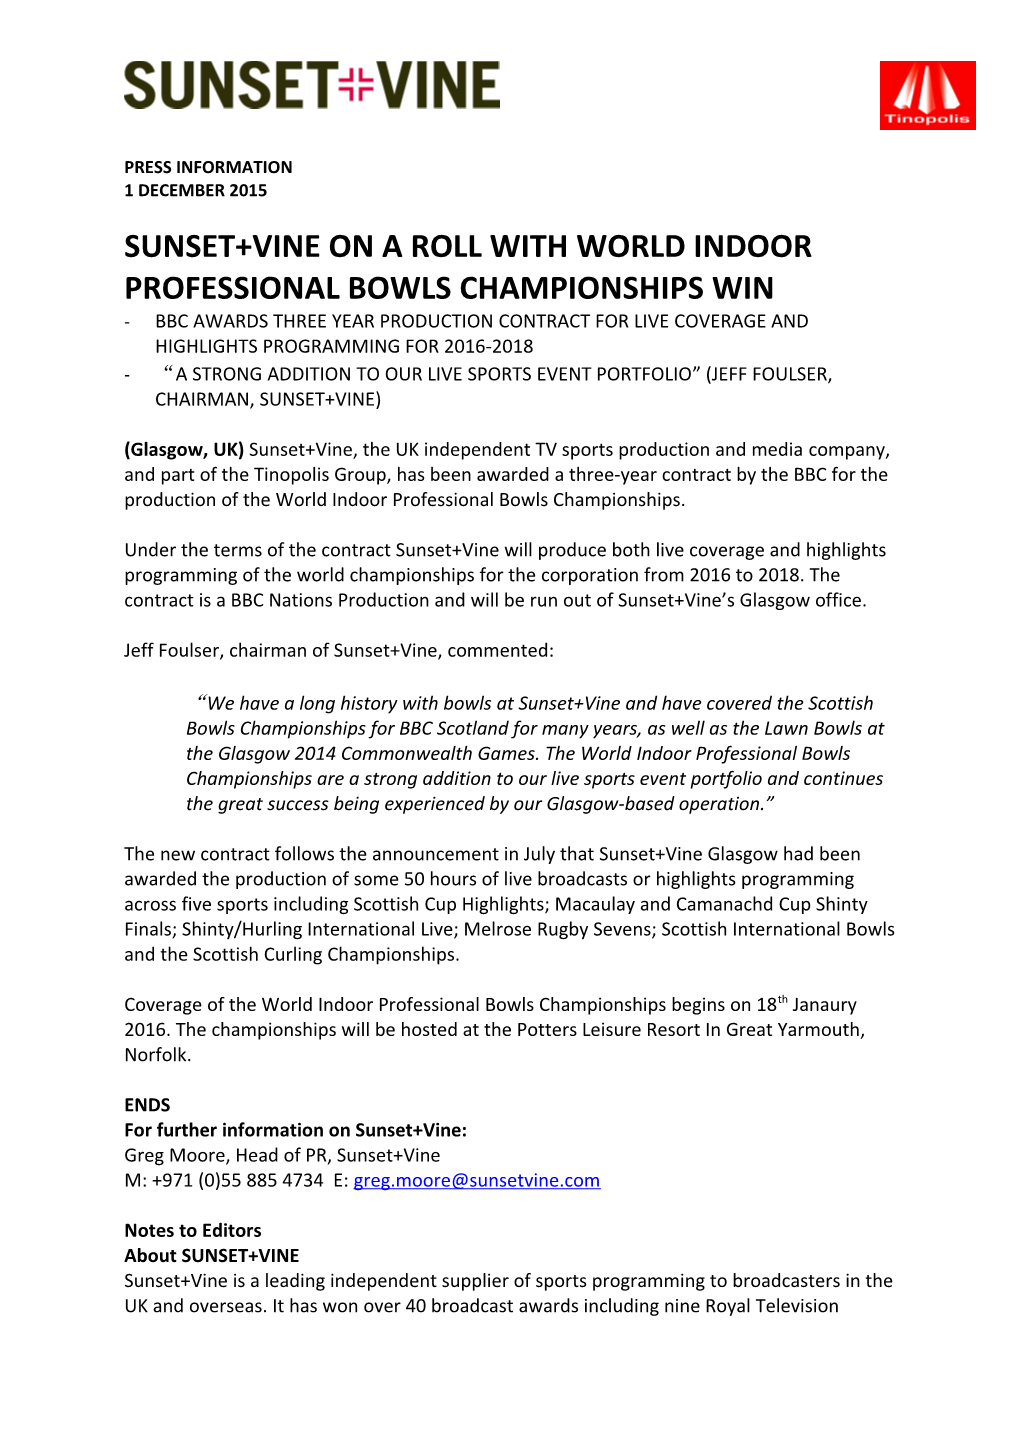 Sunset+Vine on a Roll with World Indoor Professional Bowls Championships Win